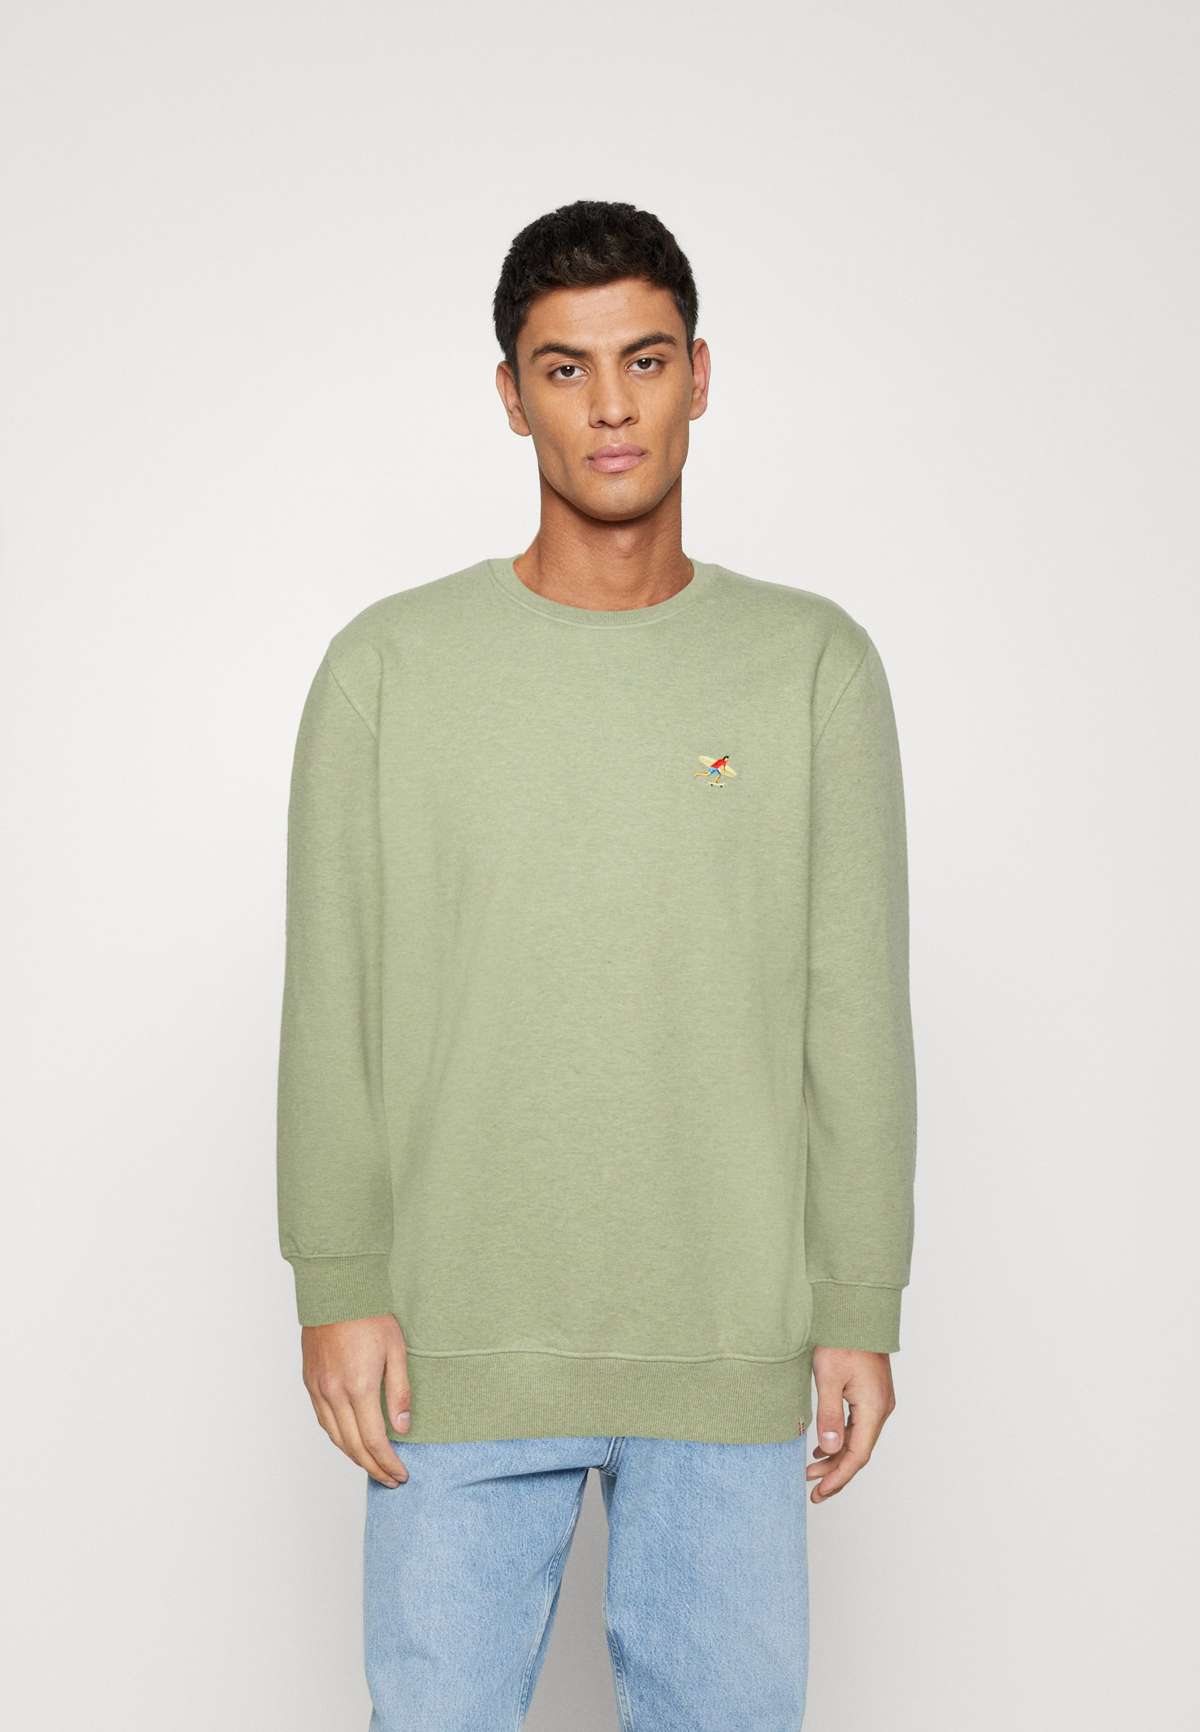 Кофта REGULAR FIT CREWNECK WITH A SMALL EMBROIDERY REGULAR FIT CREWNECK WITH A SMALL EMBROIDERY